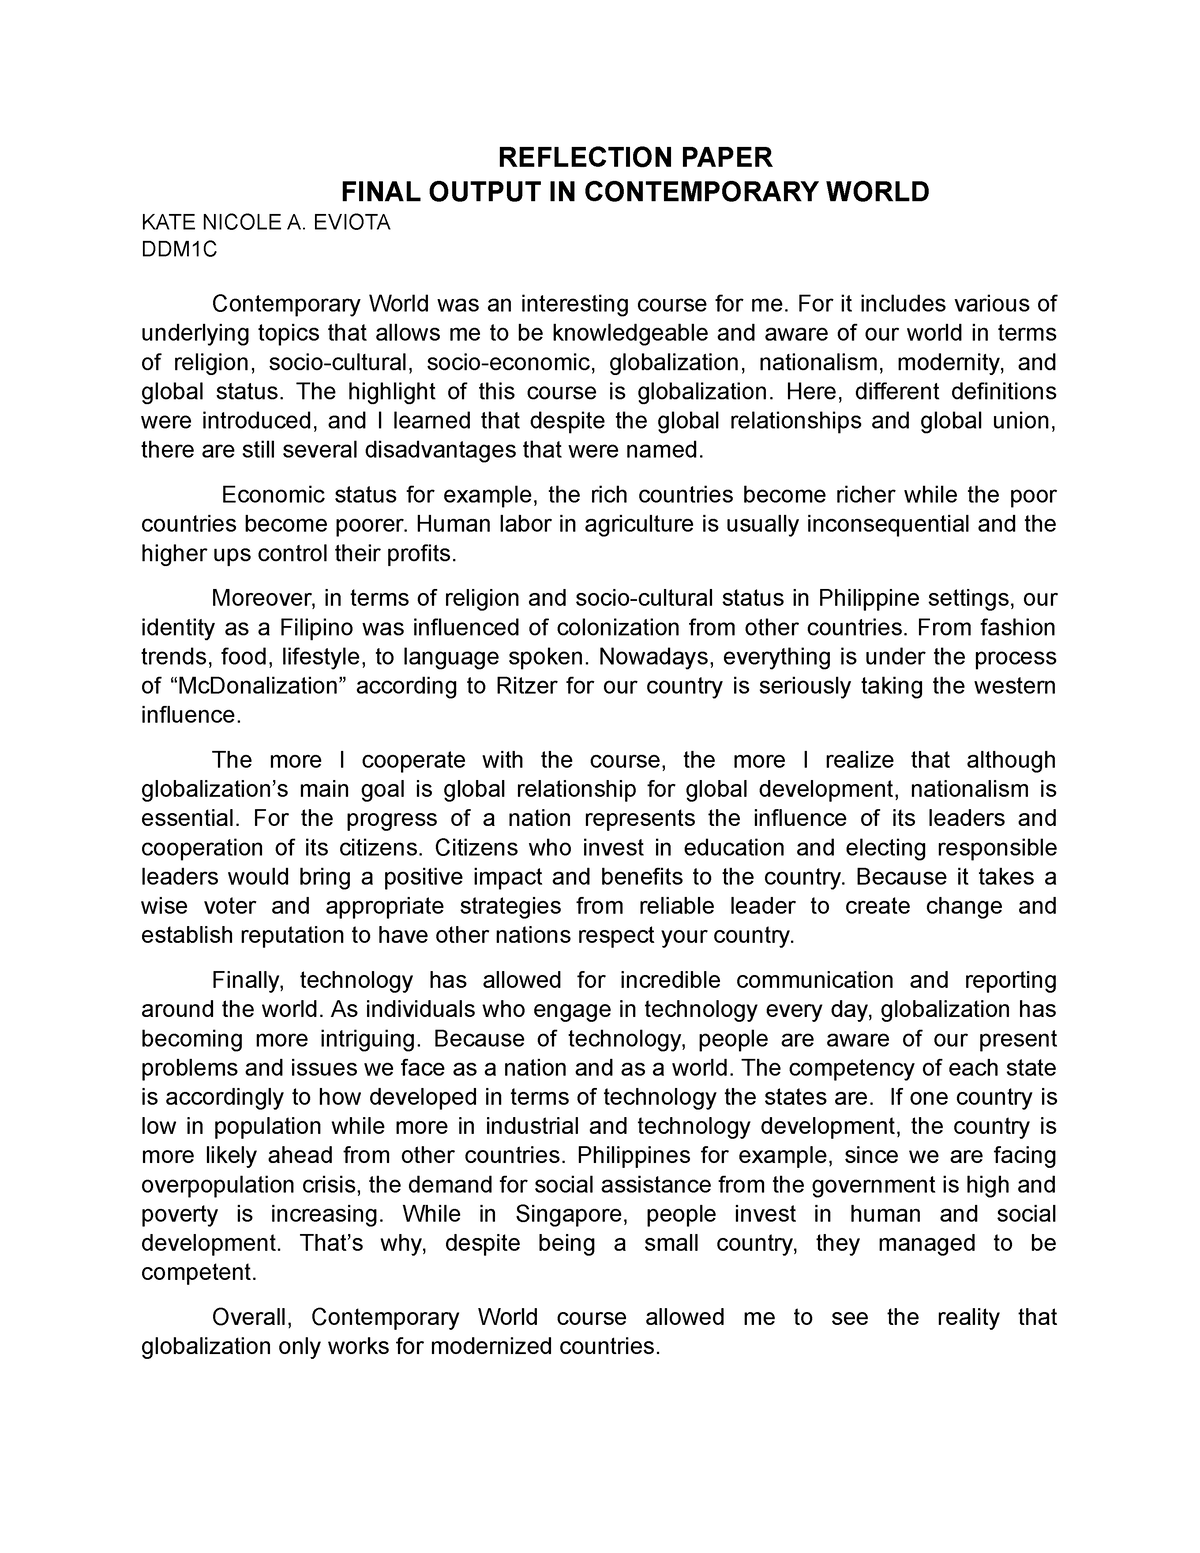 essay reflection about contemporary world subject